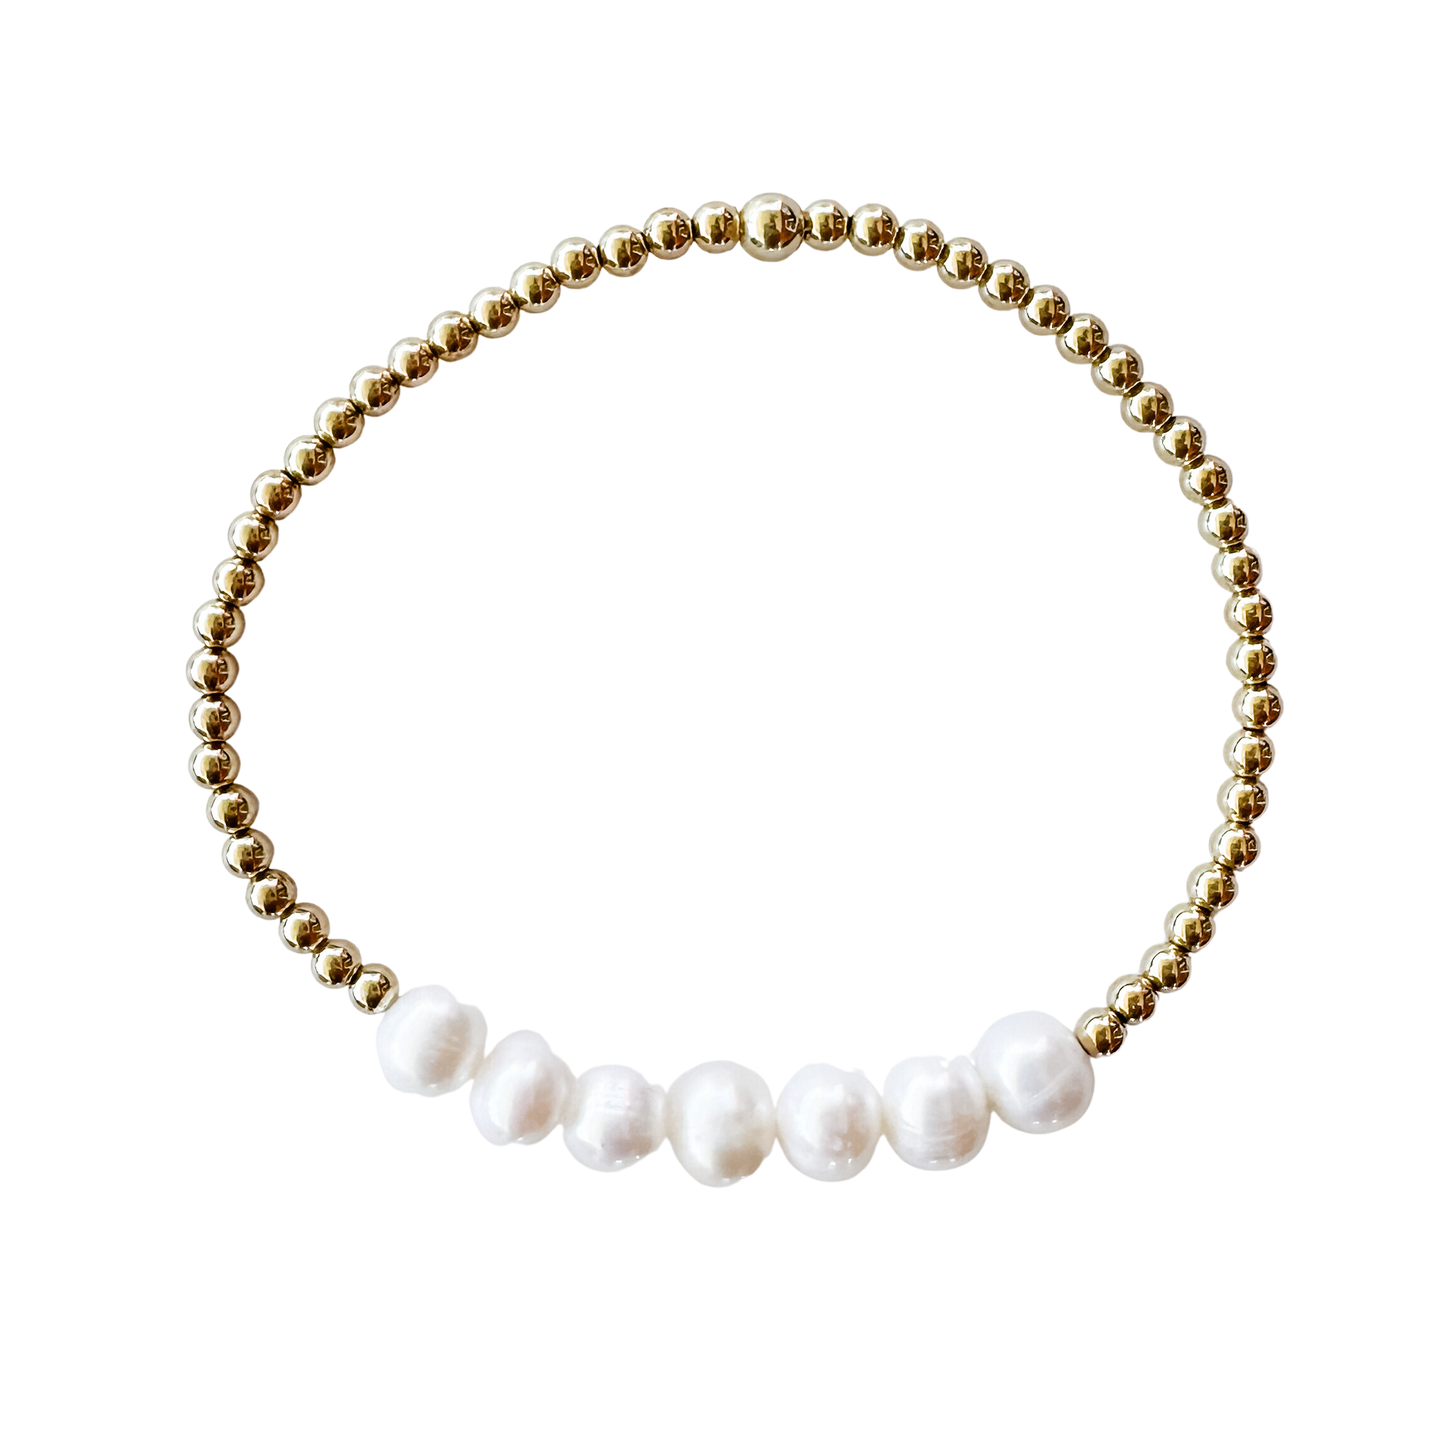 Skinny Oval Pearl Necklace Clasp